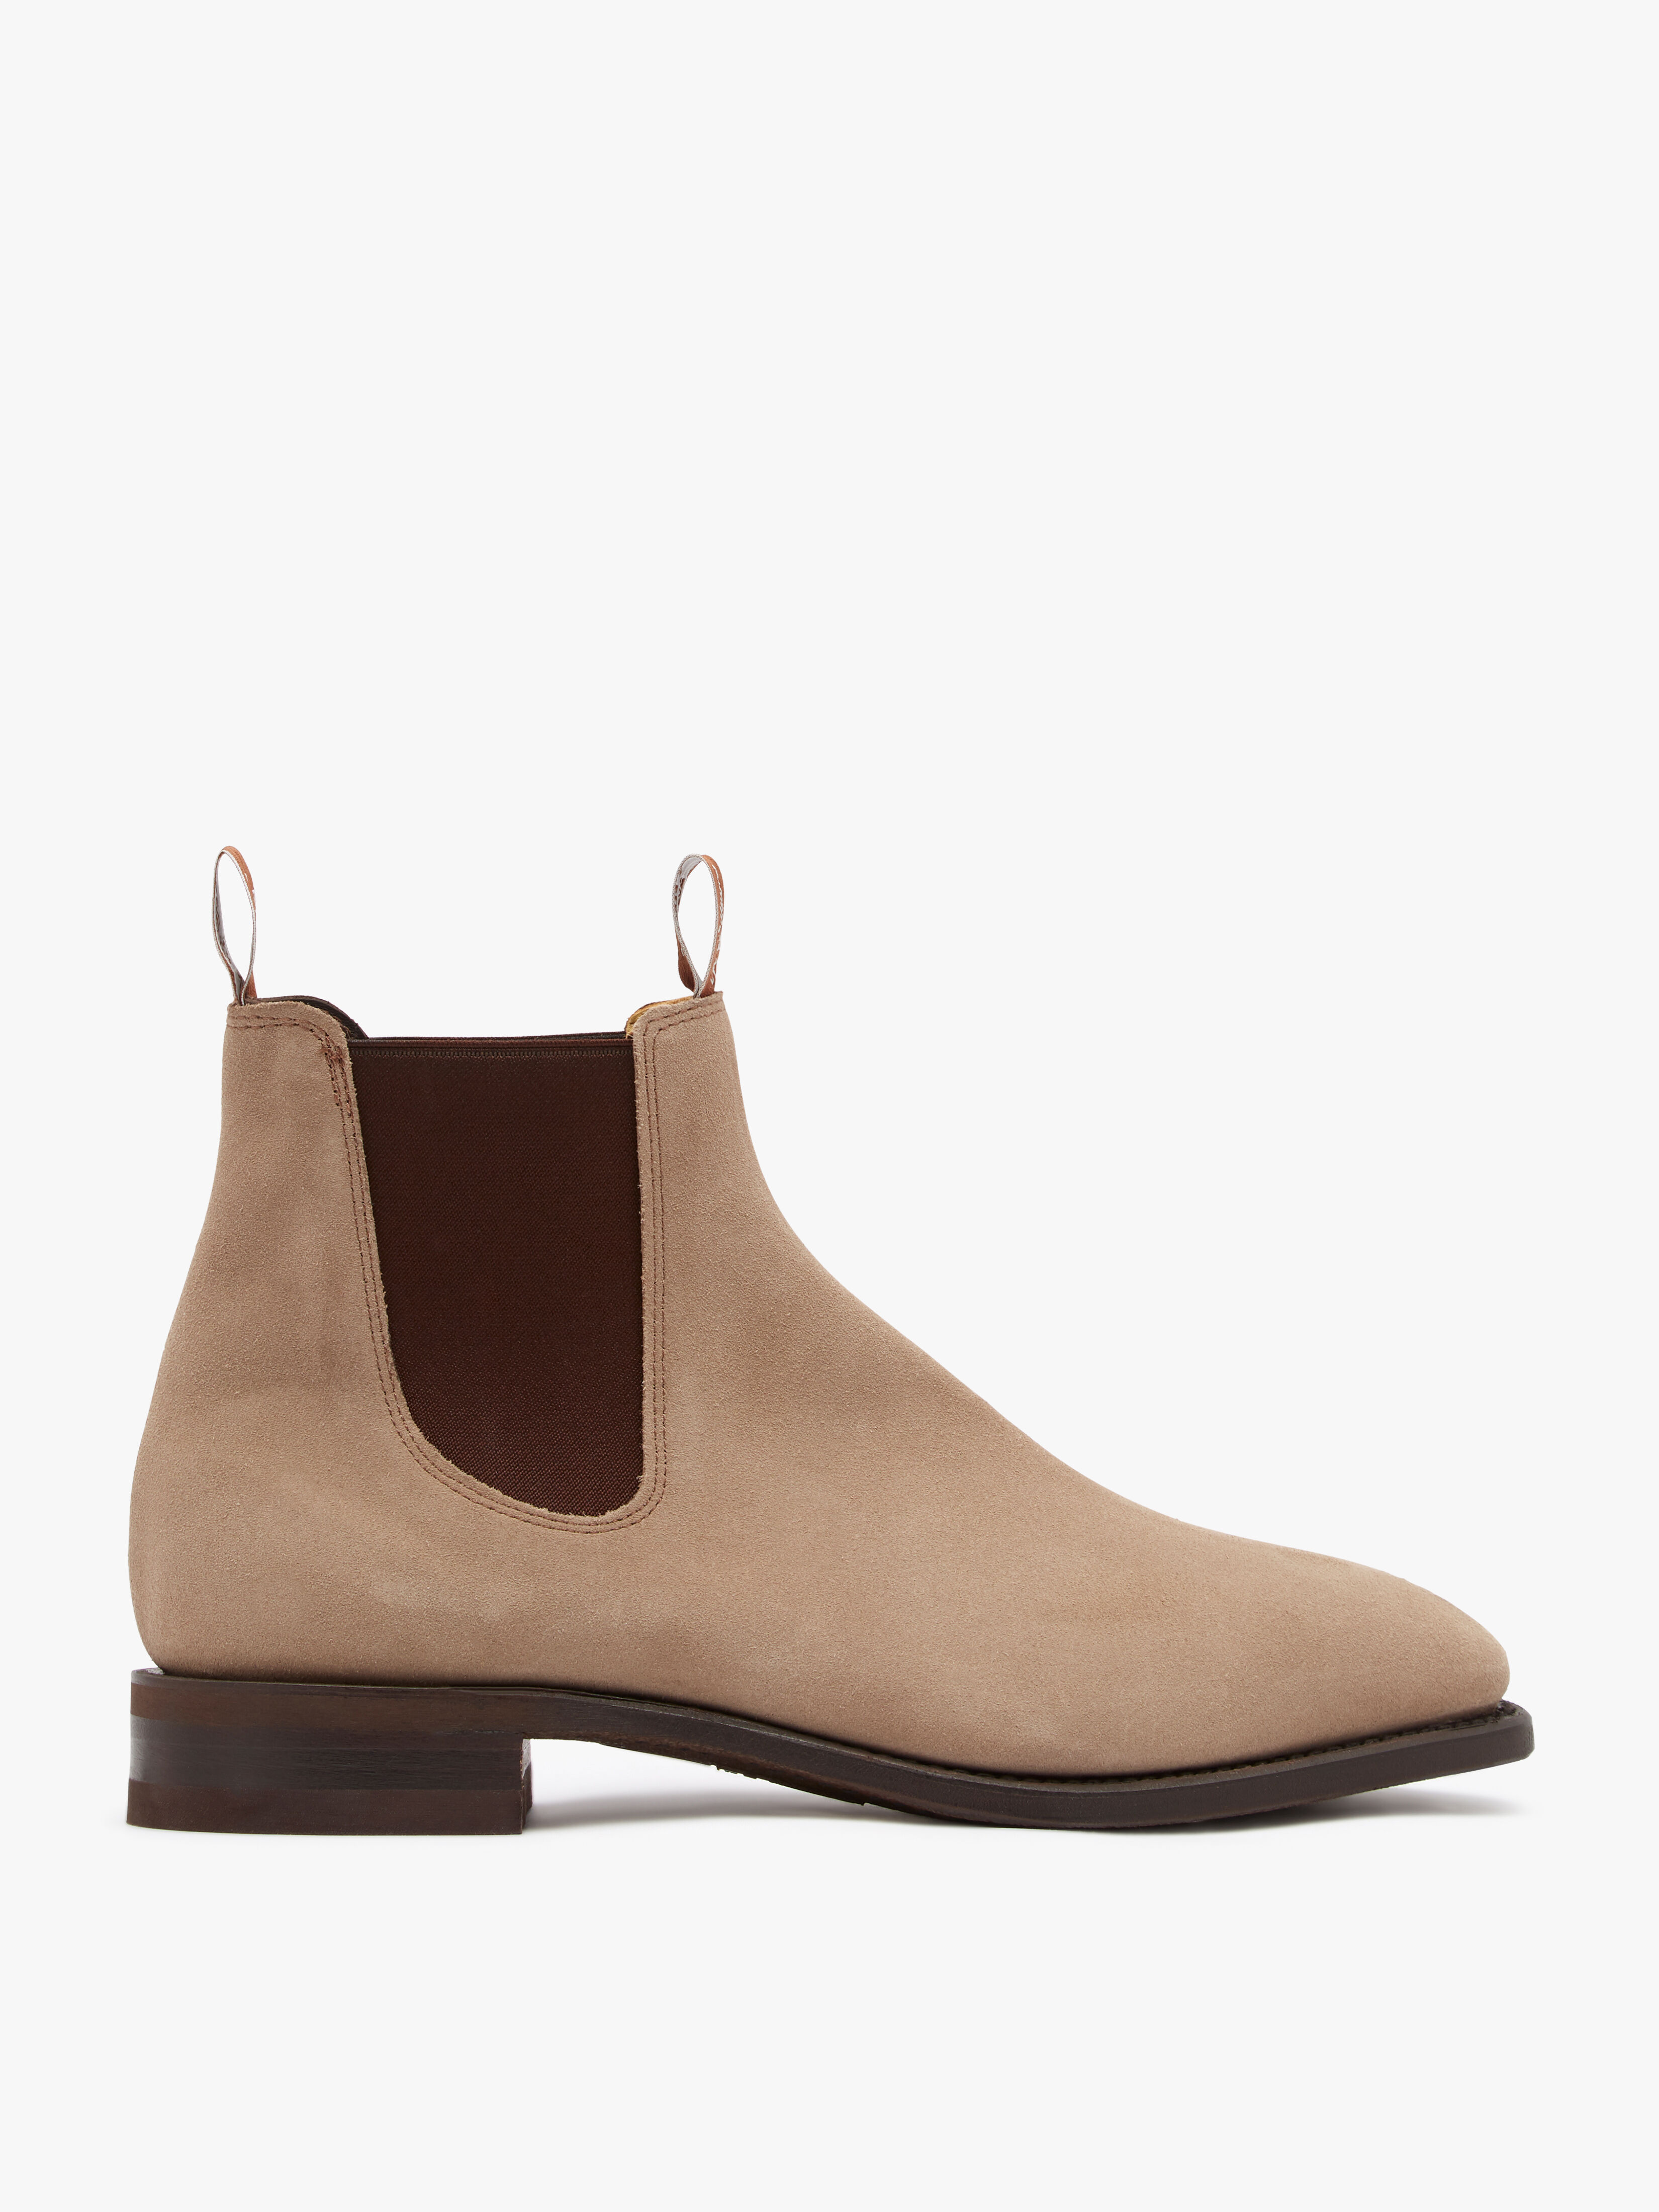 rm williams suede cleaner